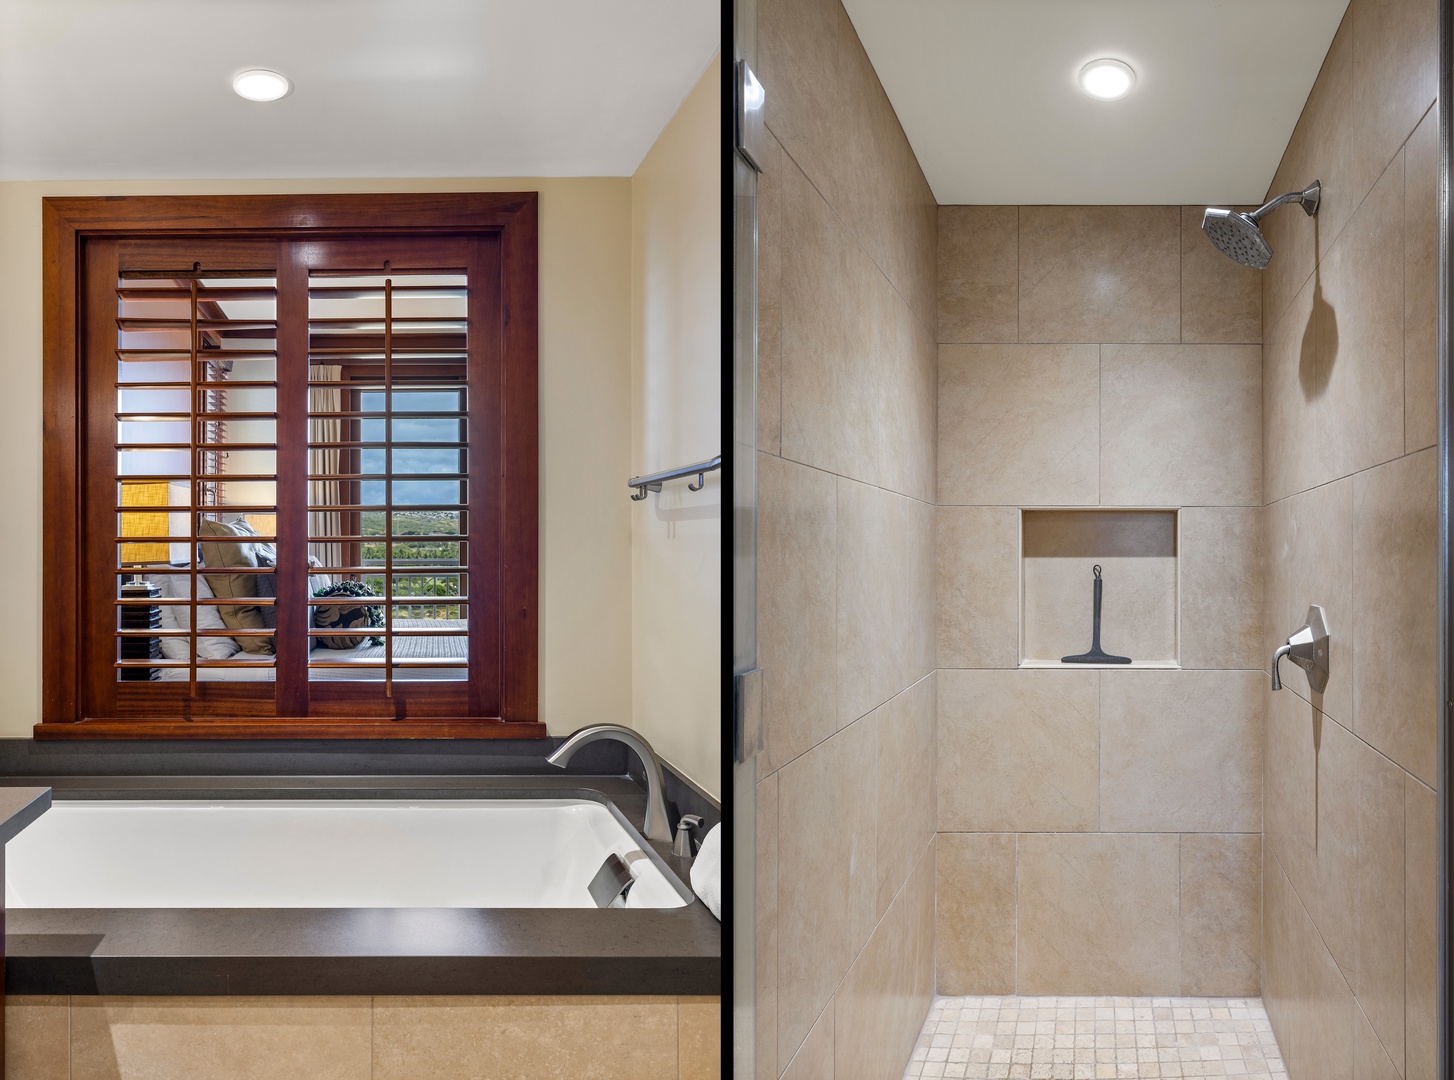 Kapolei Vacation Rentals, Ko Olina Beach Villas O1001 - The primary guest bath with a walk-in shower and double vanity.